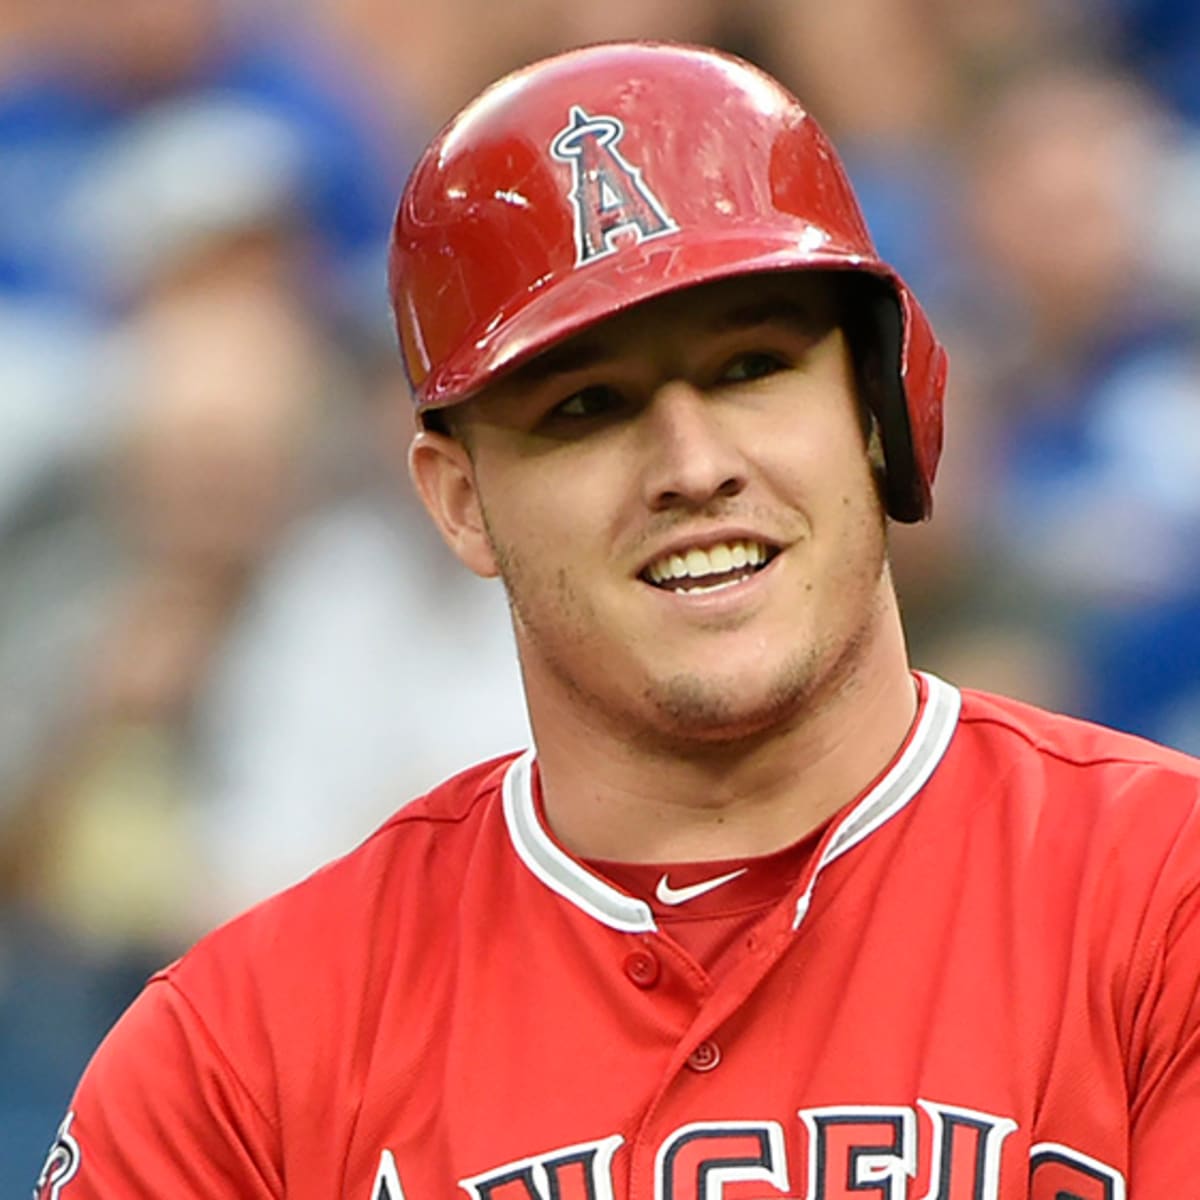 Is Mike Trout the greatest baseball player ever? 